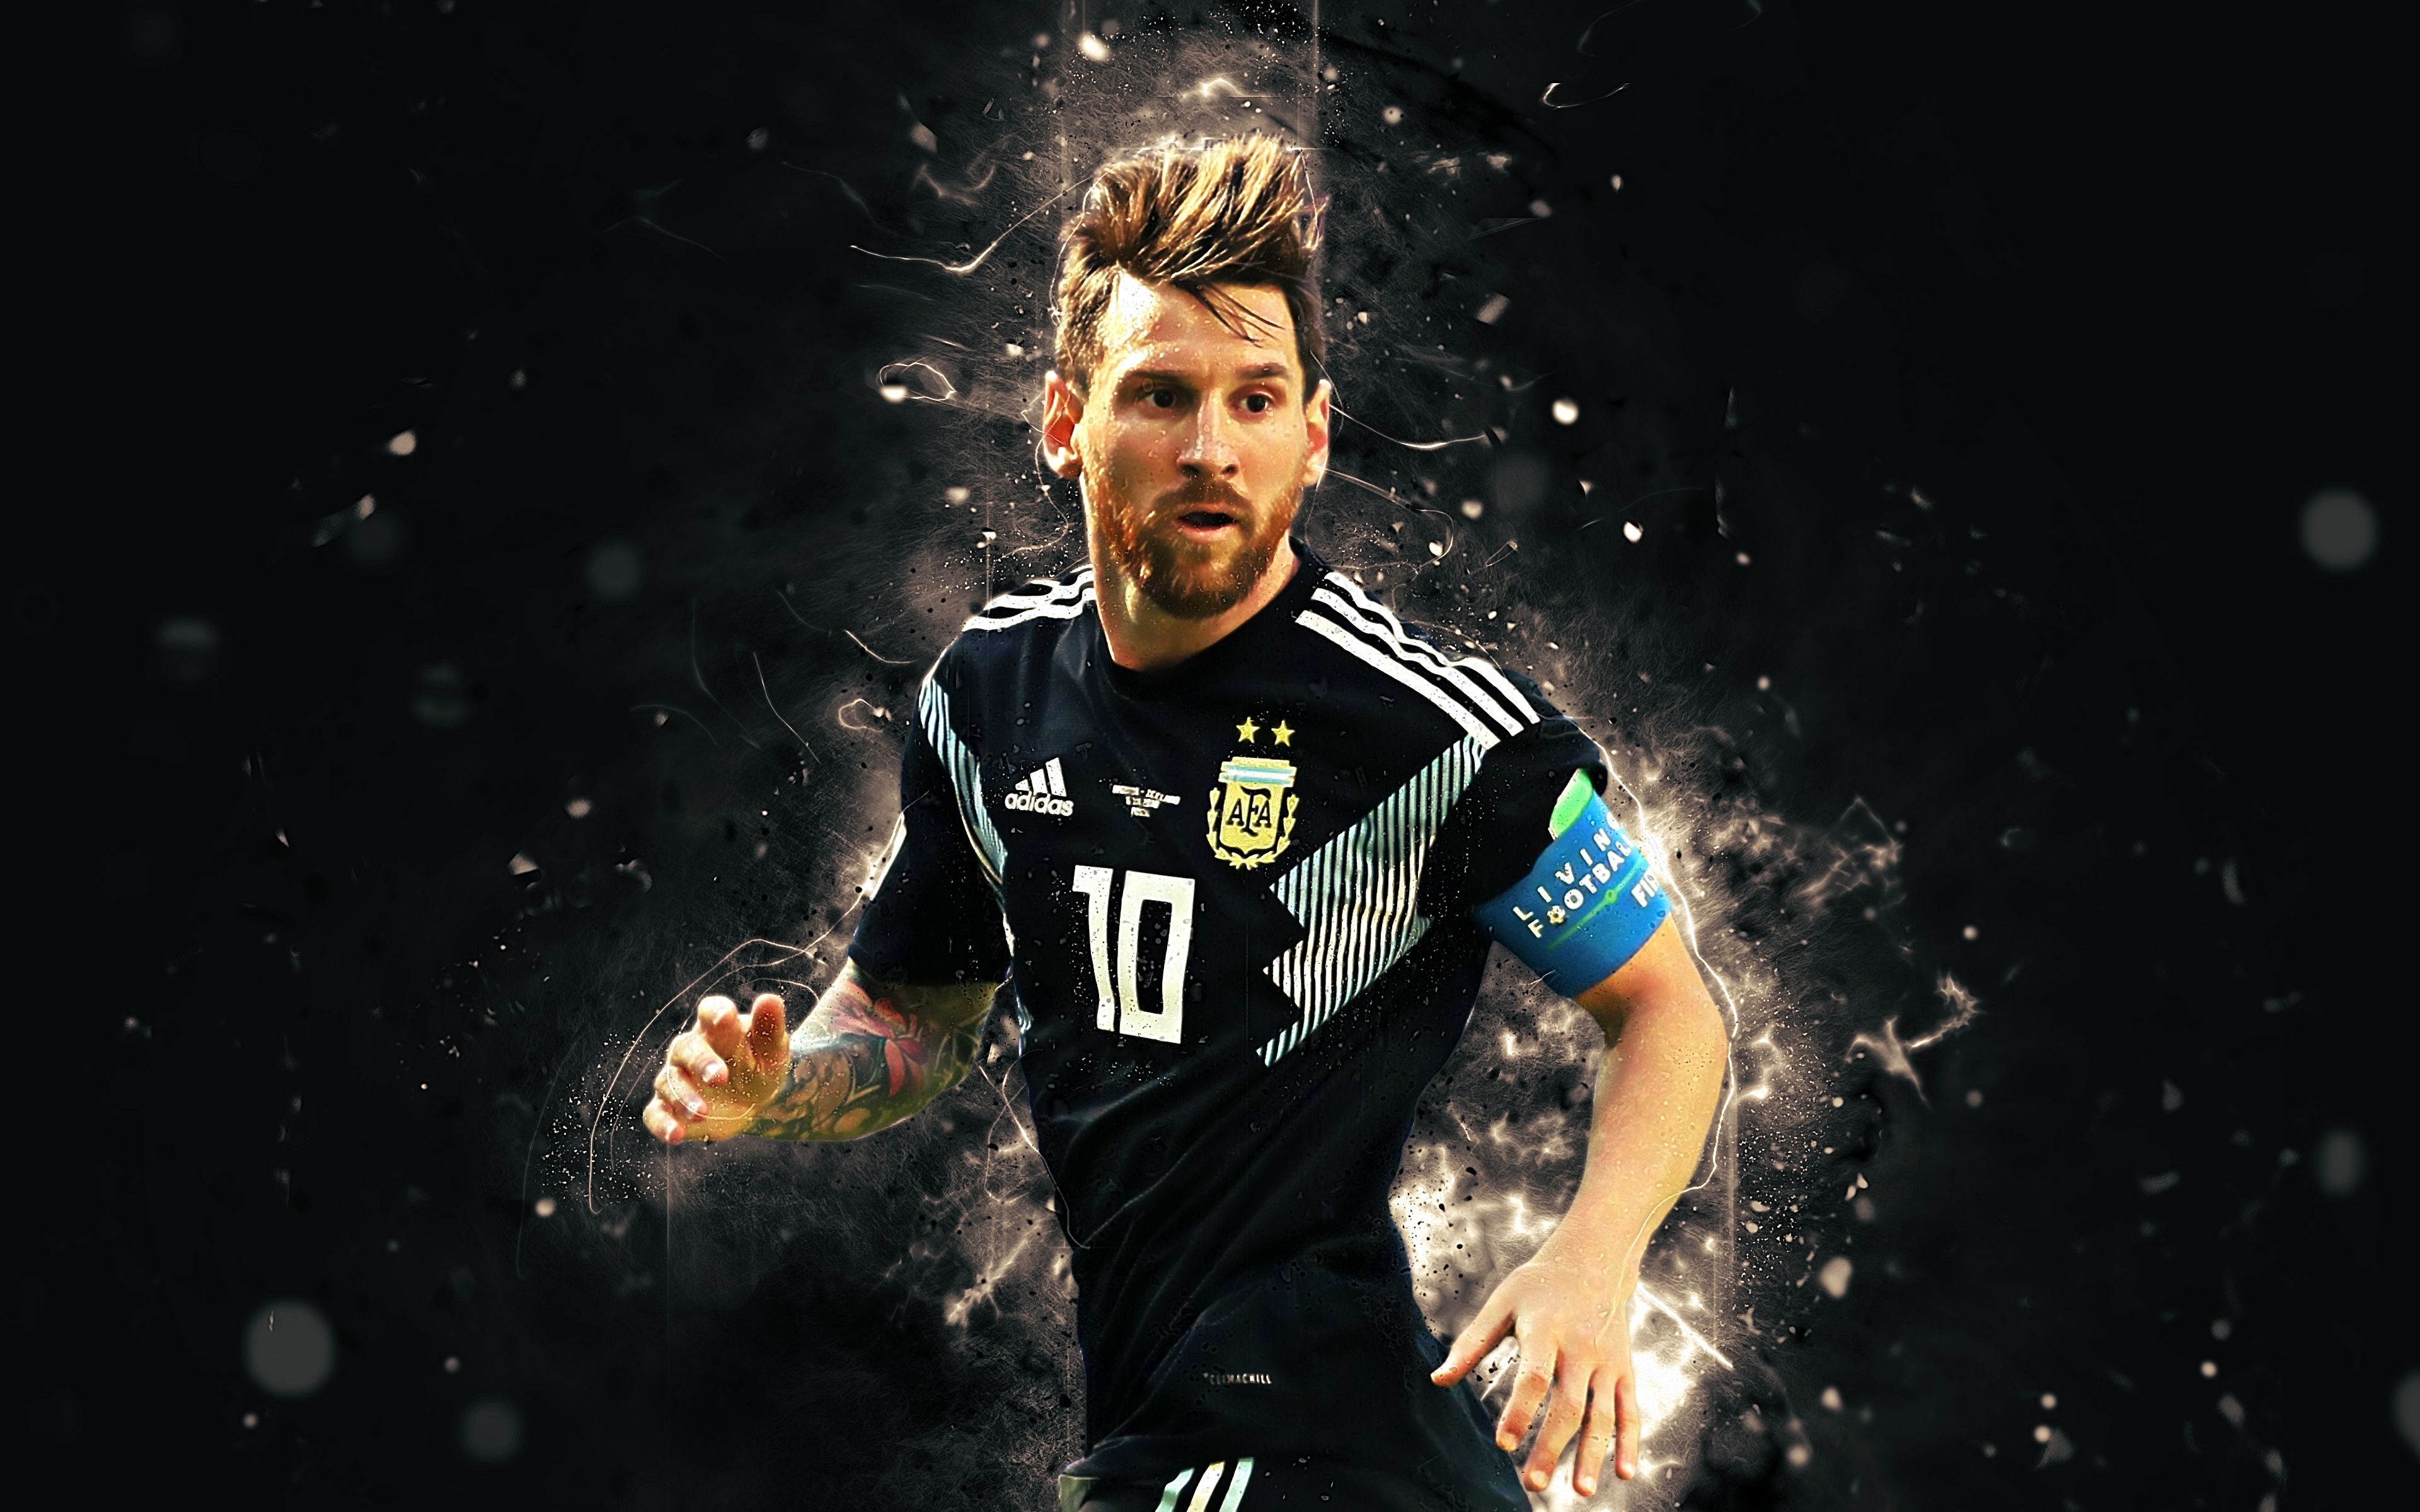 Lionel Messi Argentina 2018 Wallpaper Lionel Messi is a professional footballer who plays as a forward for Spanish club Barcelona and the Argentina national team. He was born on 24 June 1987 in Rosario, Argentina. Messi is widely regarded as one of the greatest footballers of all time. He has won numerous awards, including four Ballon d'Or awards, and is the current record holder for the most Ballon d'Or awards. Messi has also won numerous titles with both Barcelona and the Argentina national team. He is known for his dribbling, passing, and goal-scoring abilities, and is considered one of the best players in the world. - Messi